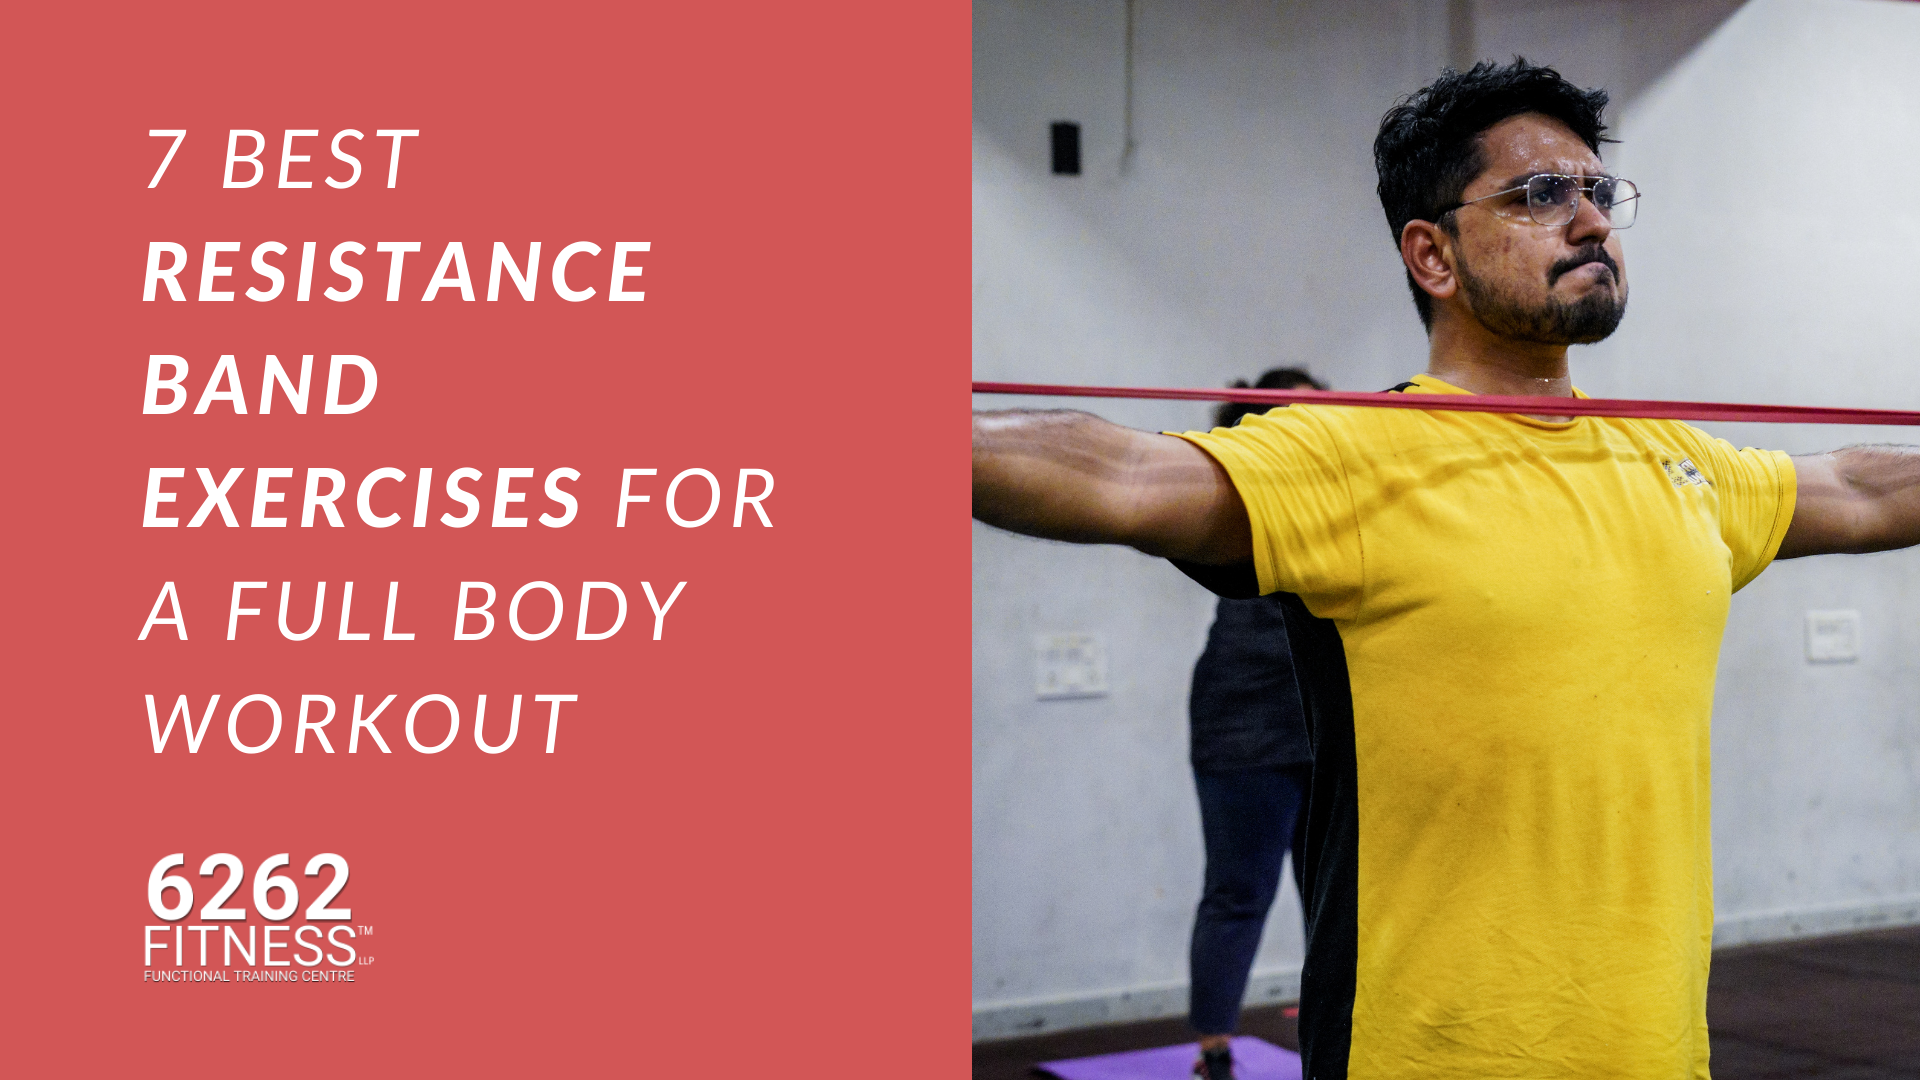 7 Best Resistance Band Exercises for a Full Body Workout